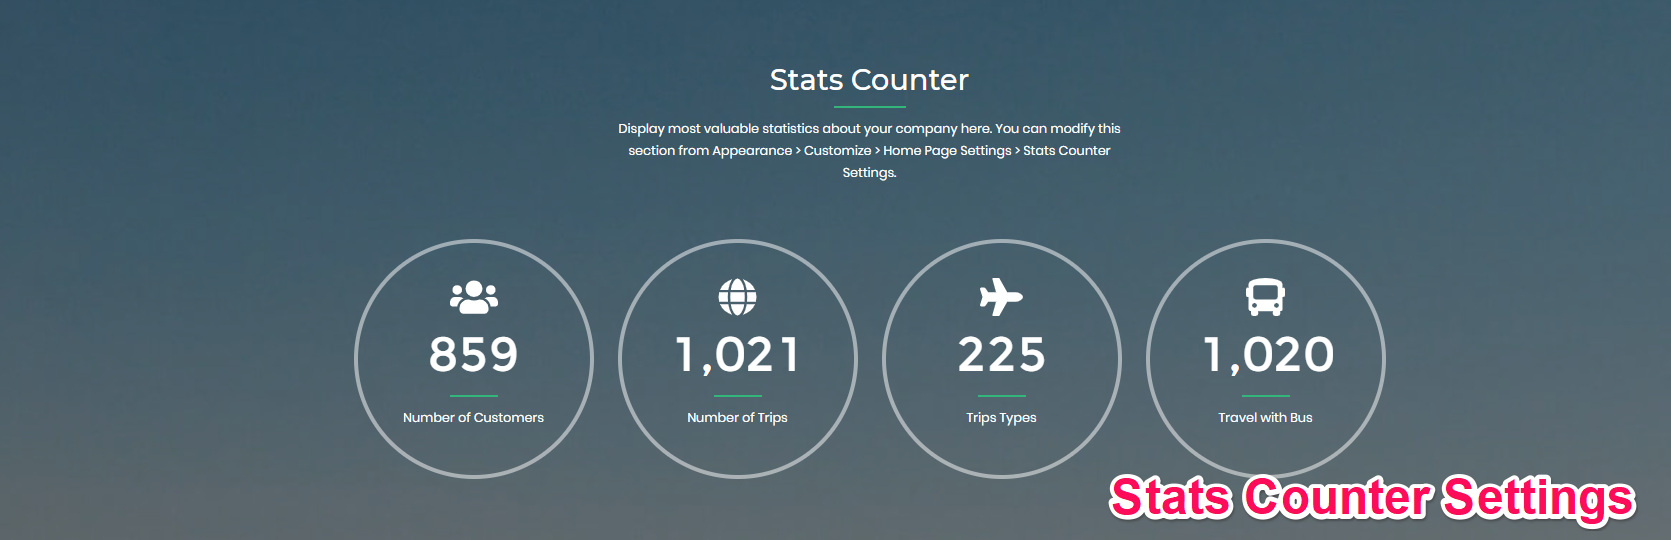 Stats Counter Settings travel agency